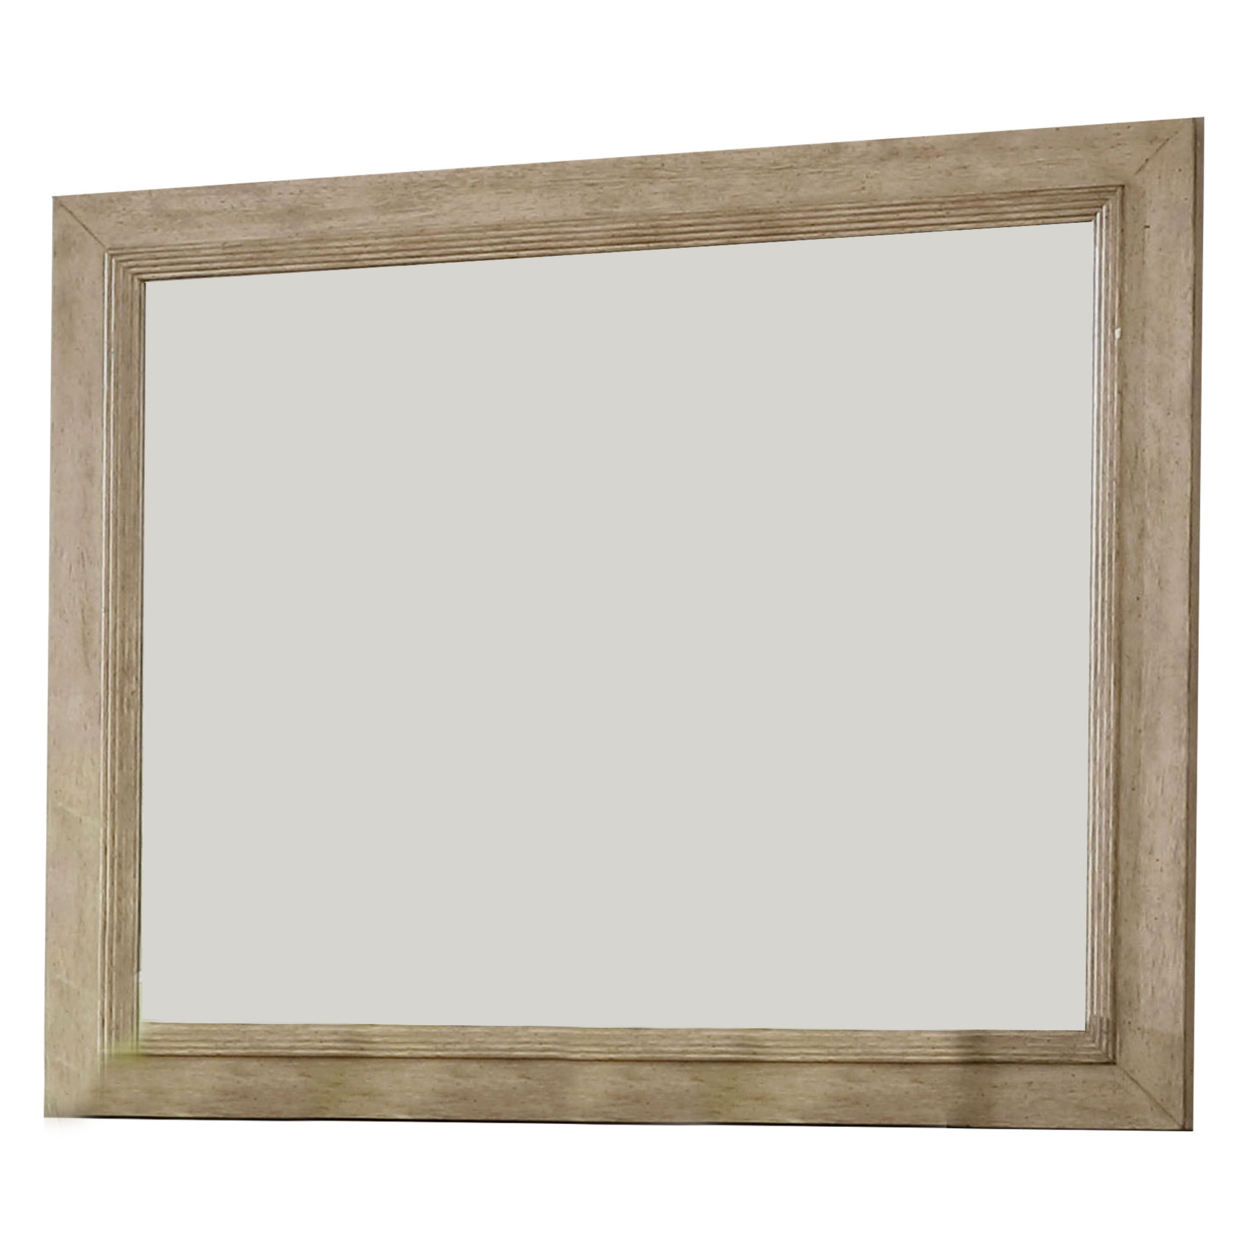 36 Inch Wooden Frame Mirror With Molded Details, Brown- Saltoro Sherpi